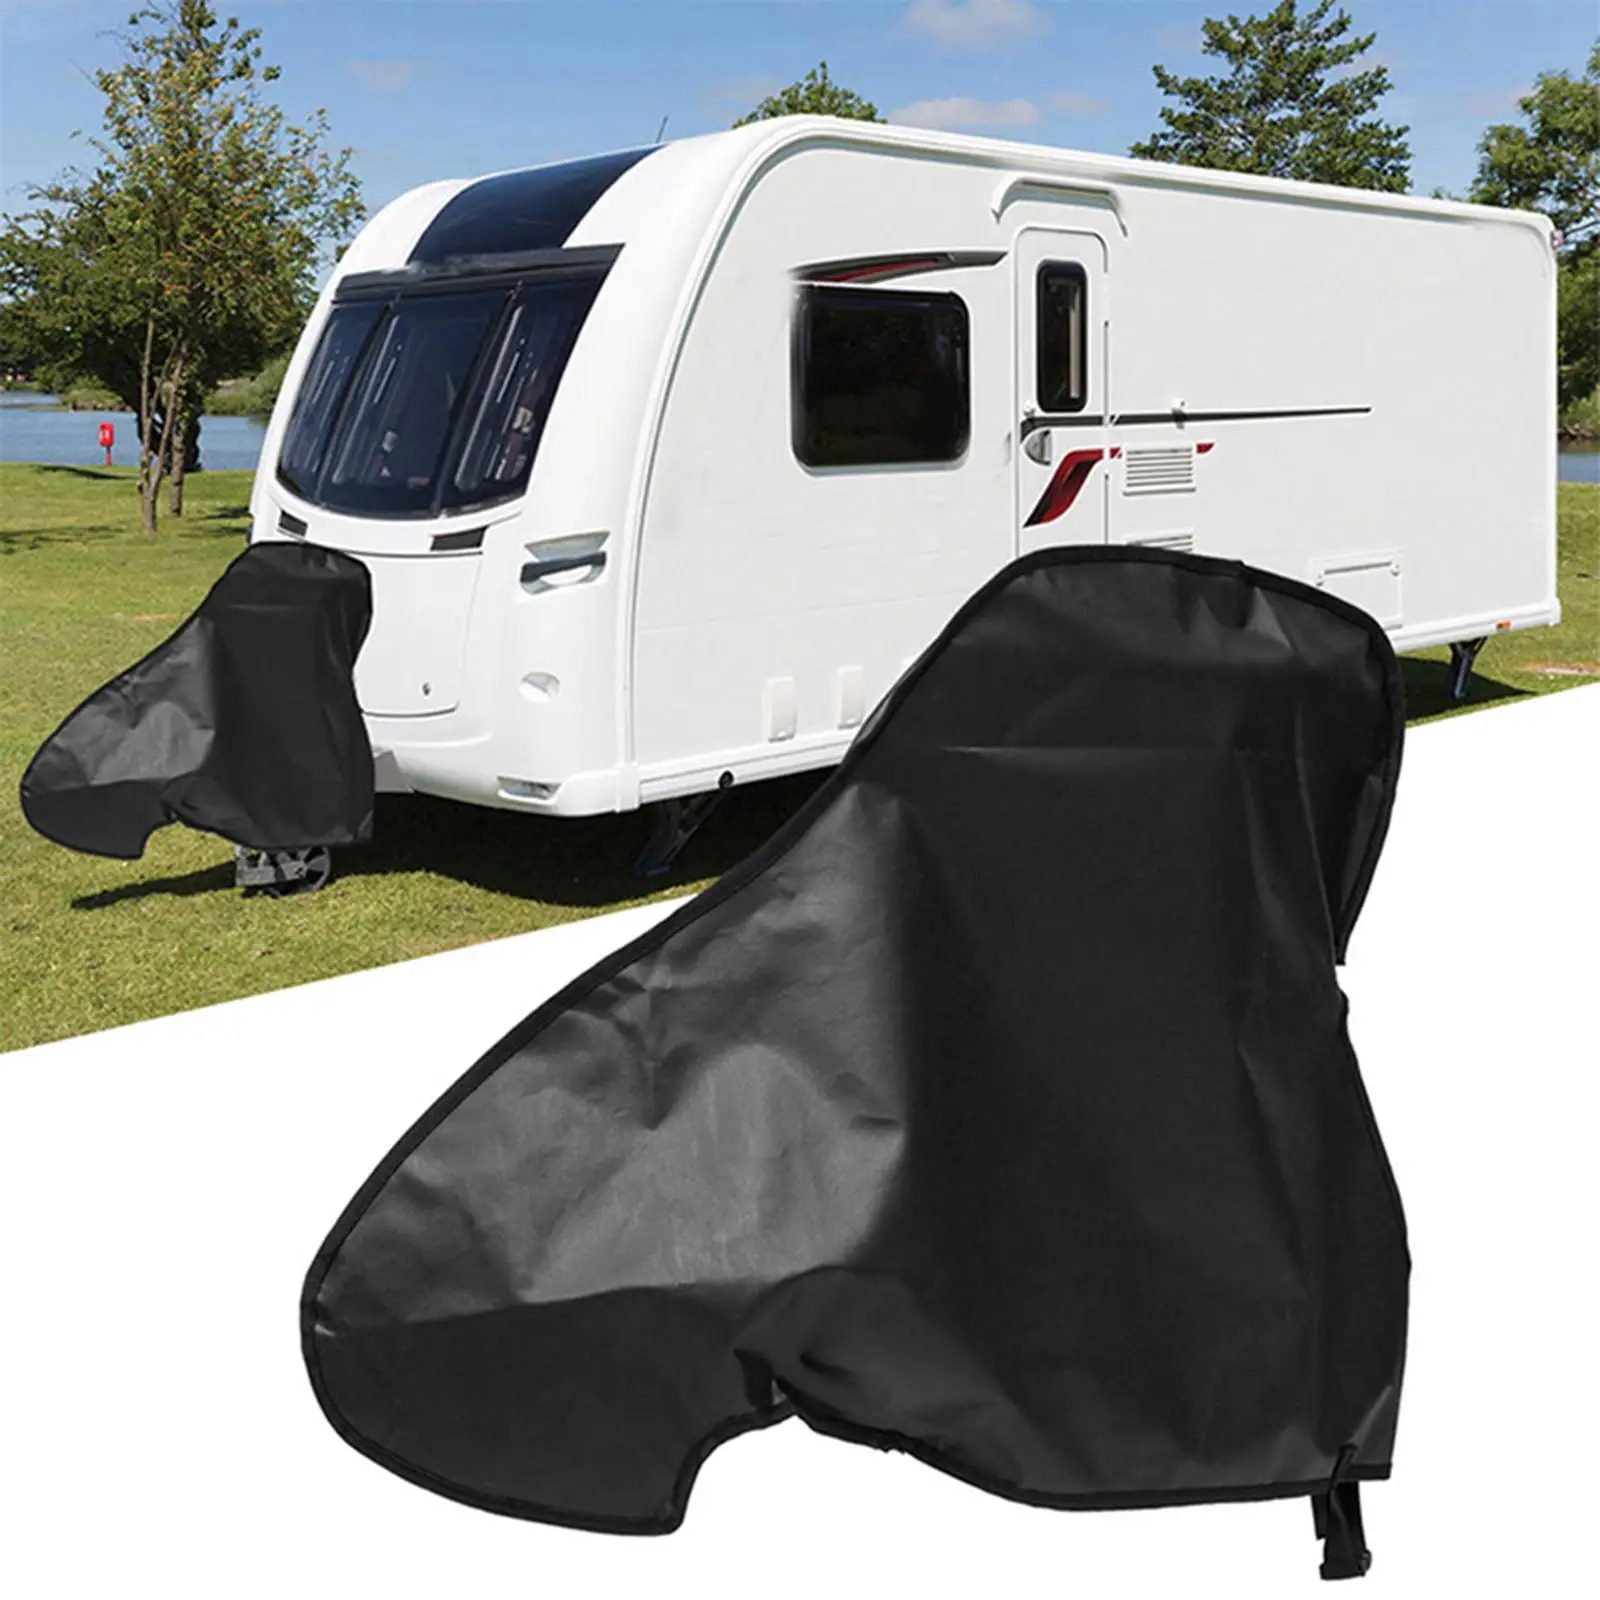 Caravan Towing Hitch Cover, RV Covers Campervan Universal Hitch Connector Trailer